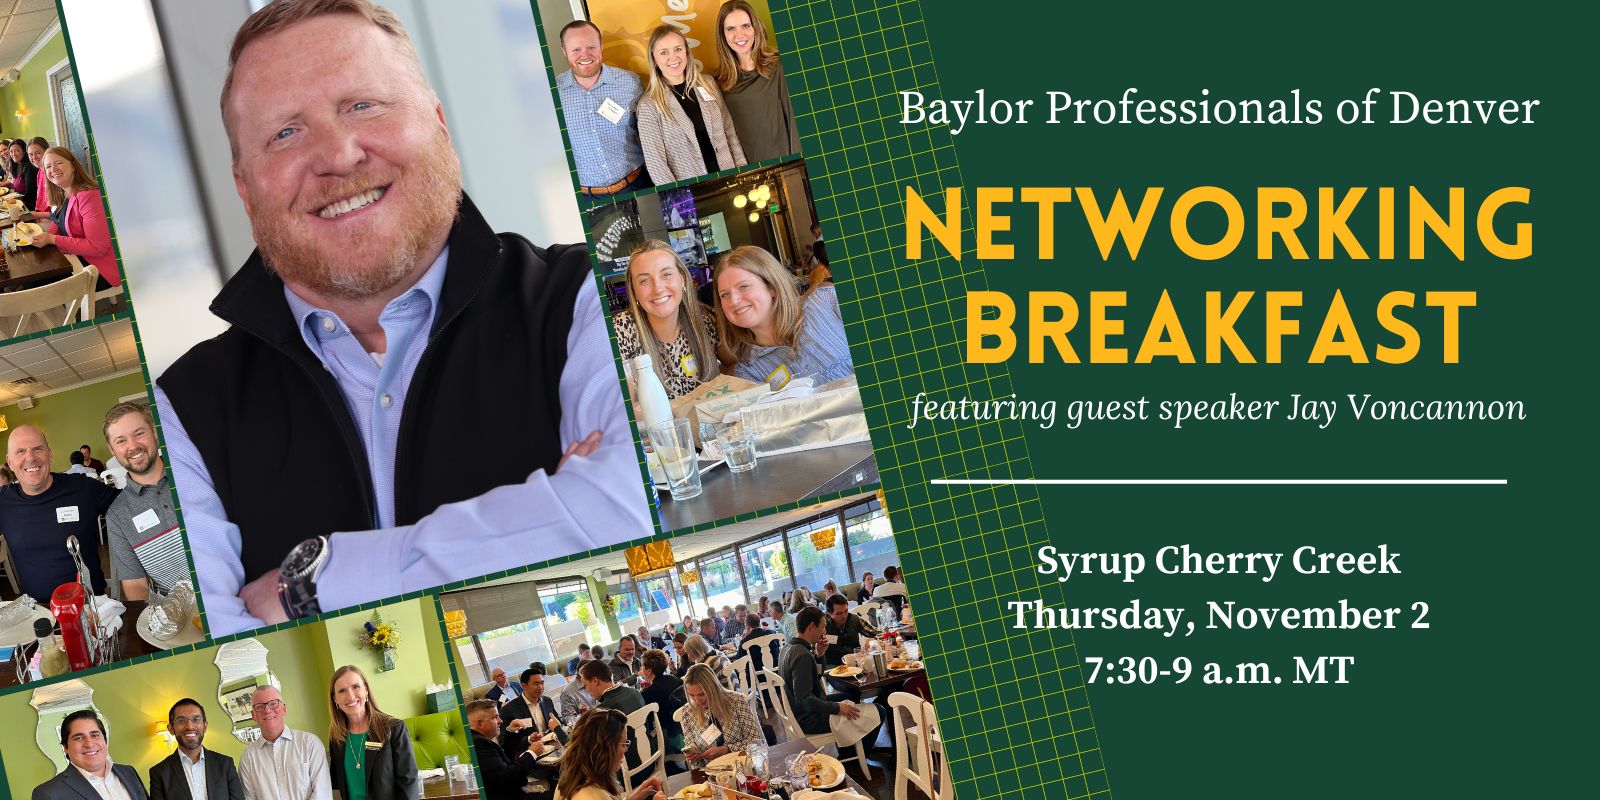 Baylor Professionals of Denver Networking Breakfast featuring guest speaker Jay Voncannon | Syrup Cherry Creek | Thursday, November 2 | 7:30-9 a.m. MT